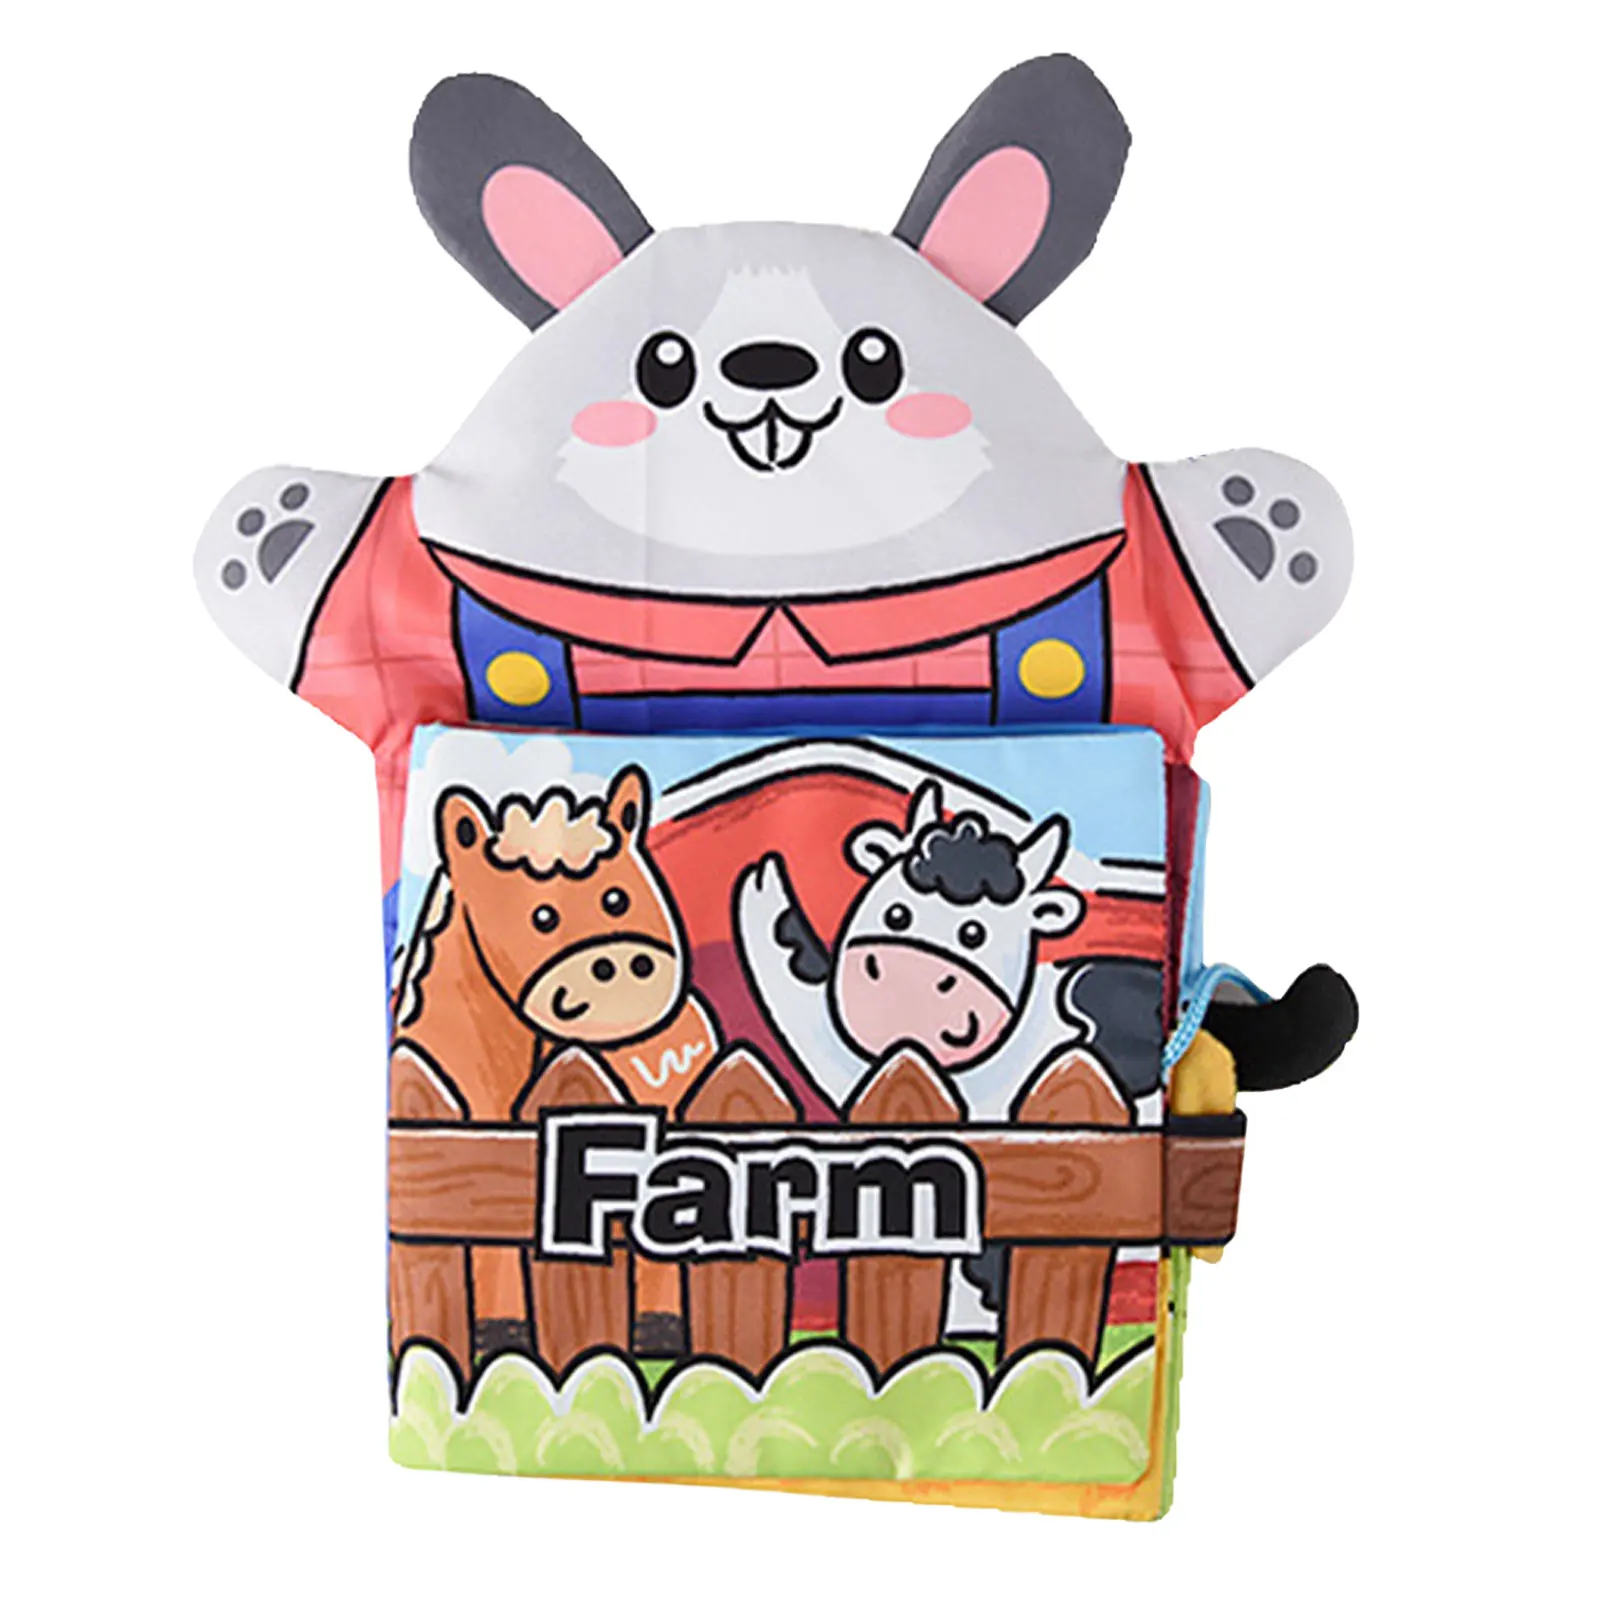 

Farm Animal Fabric Cloth Book Soft Activity Busy Book With Animal Tails Crinkle Books For Babies Soft Activity Early Education